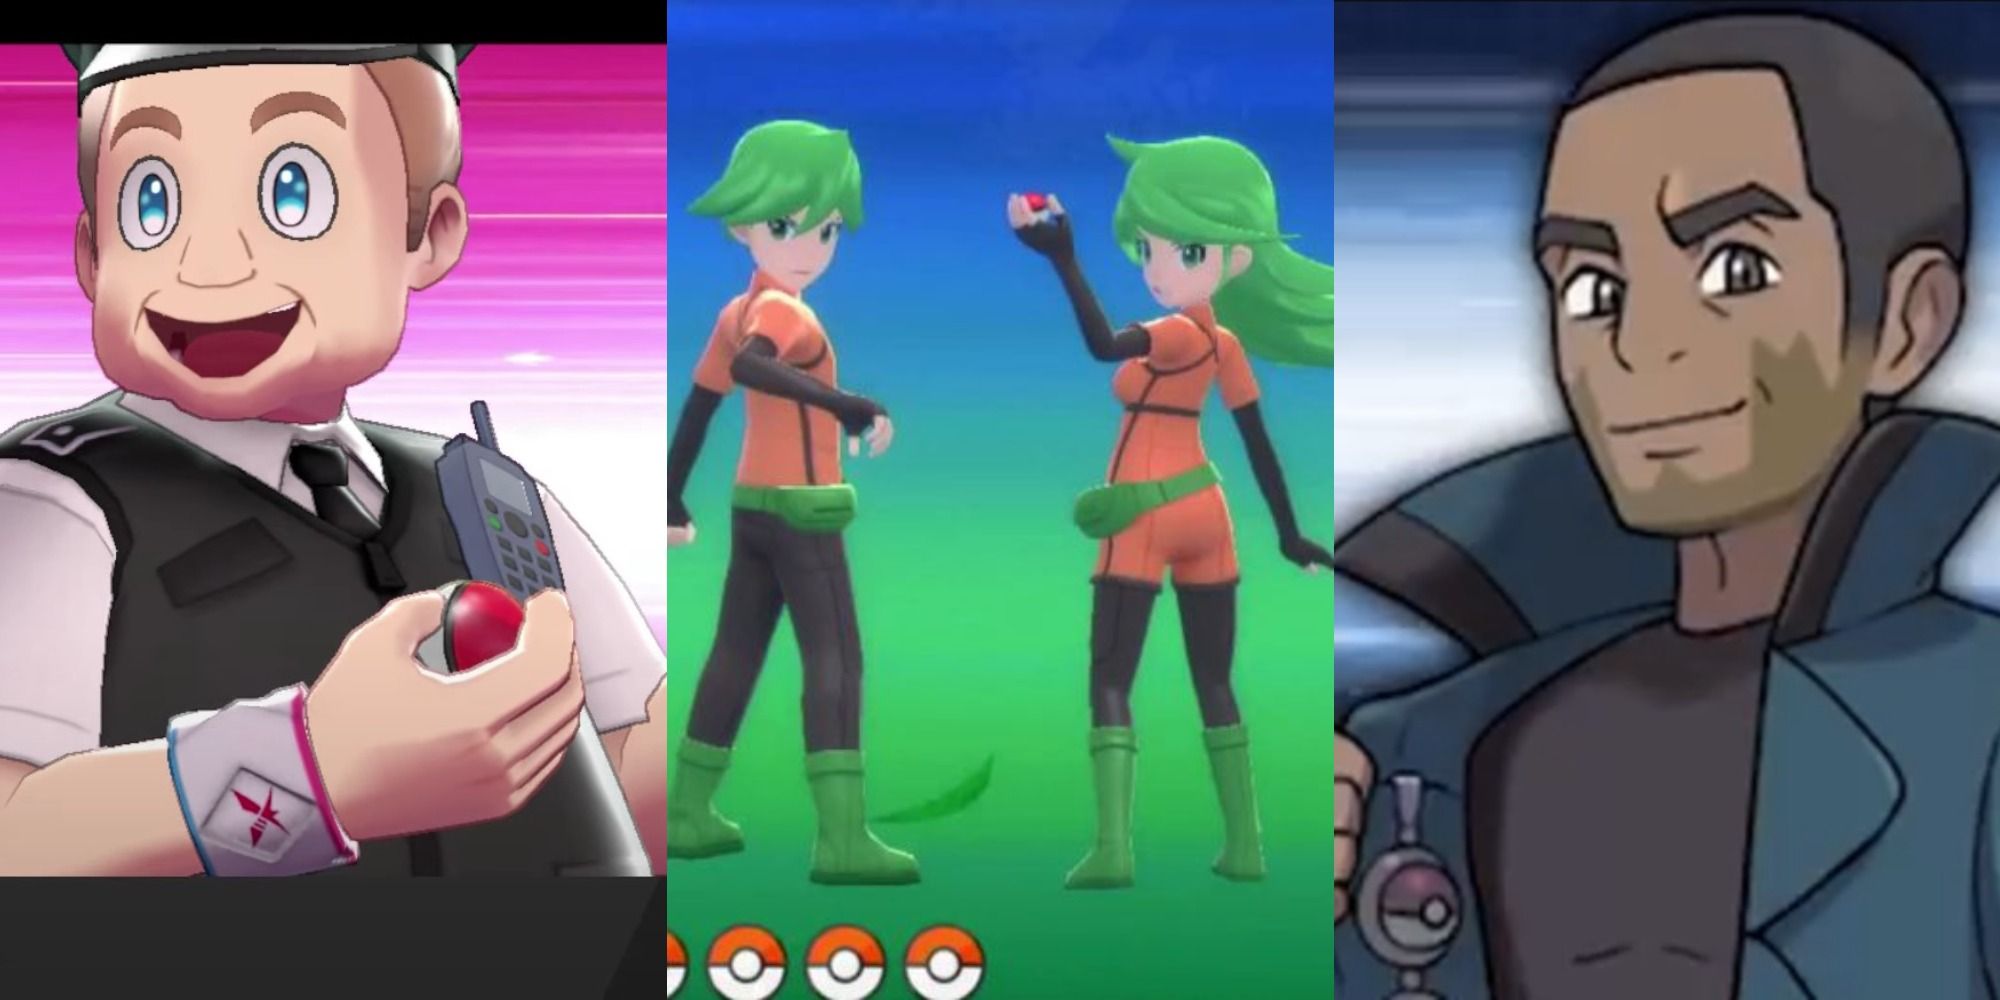 A Police Officer with a Pokeball, two ace trainers standing side by side in battle, a veteran showing his Pokeball in his jacket